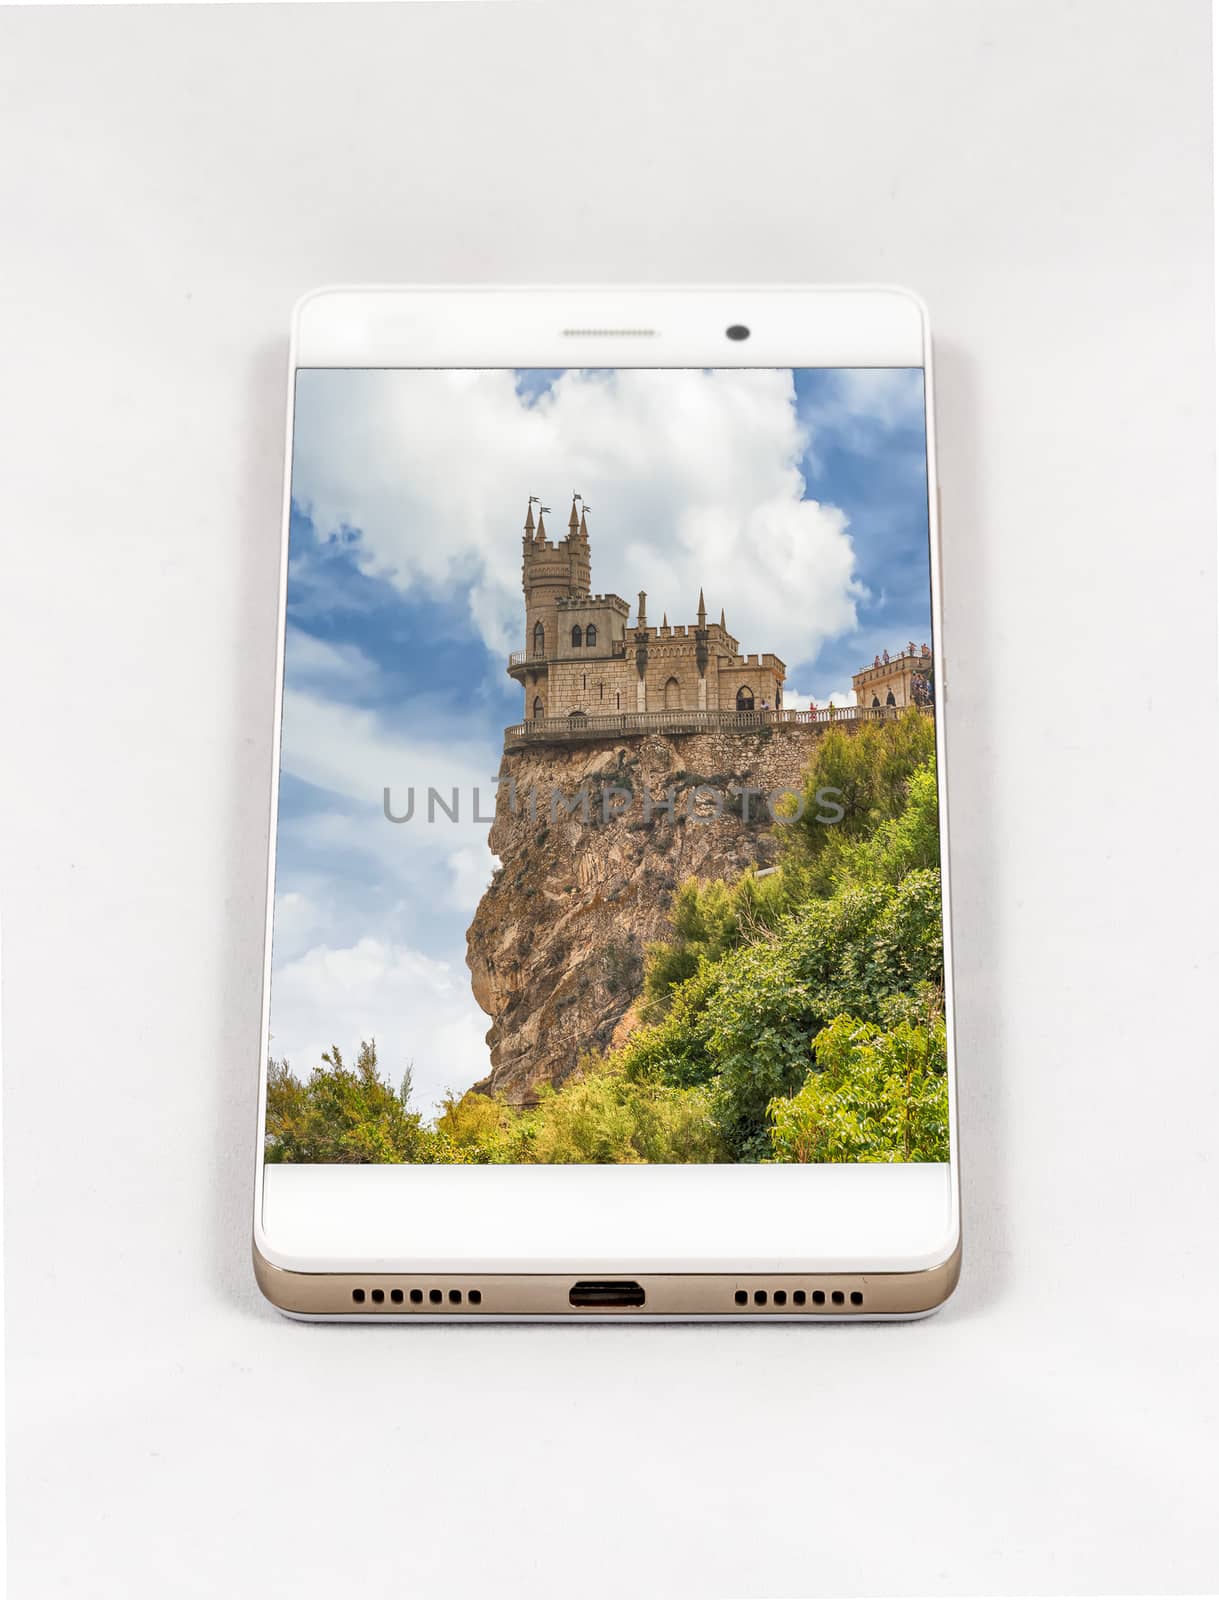 Modern smartphone displaying picture of Swallow's nest castle, Y by marcorubino